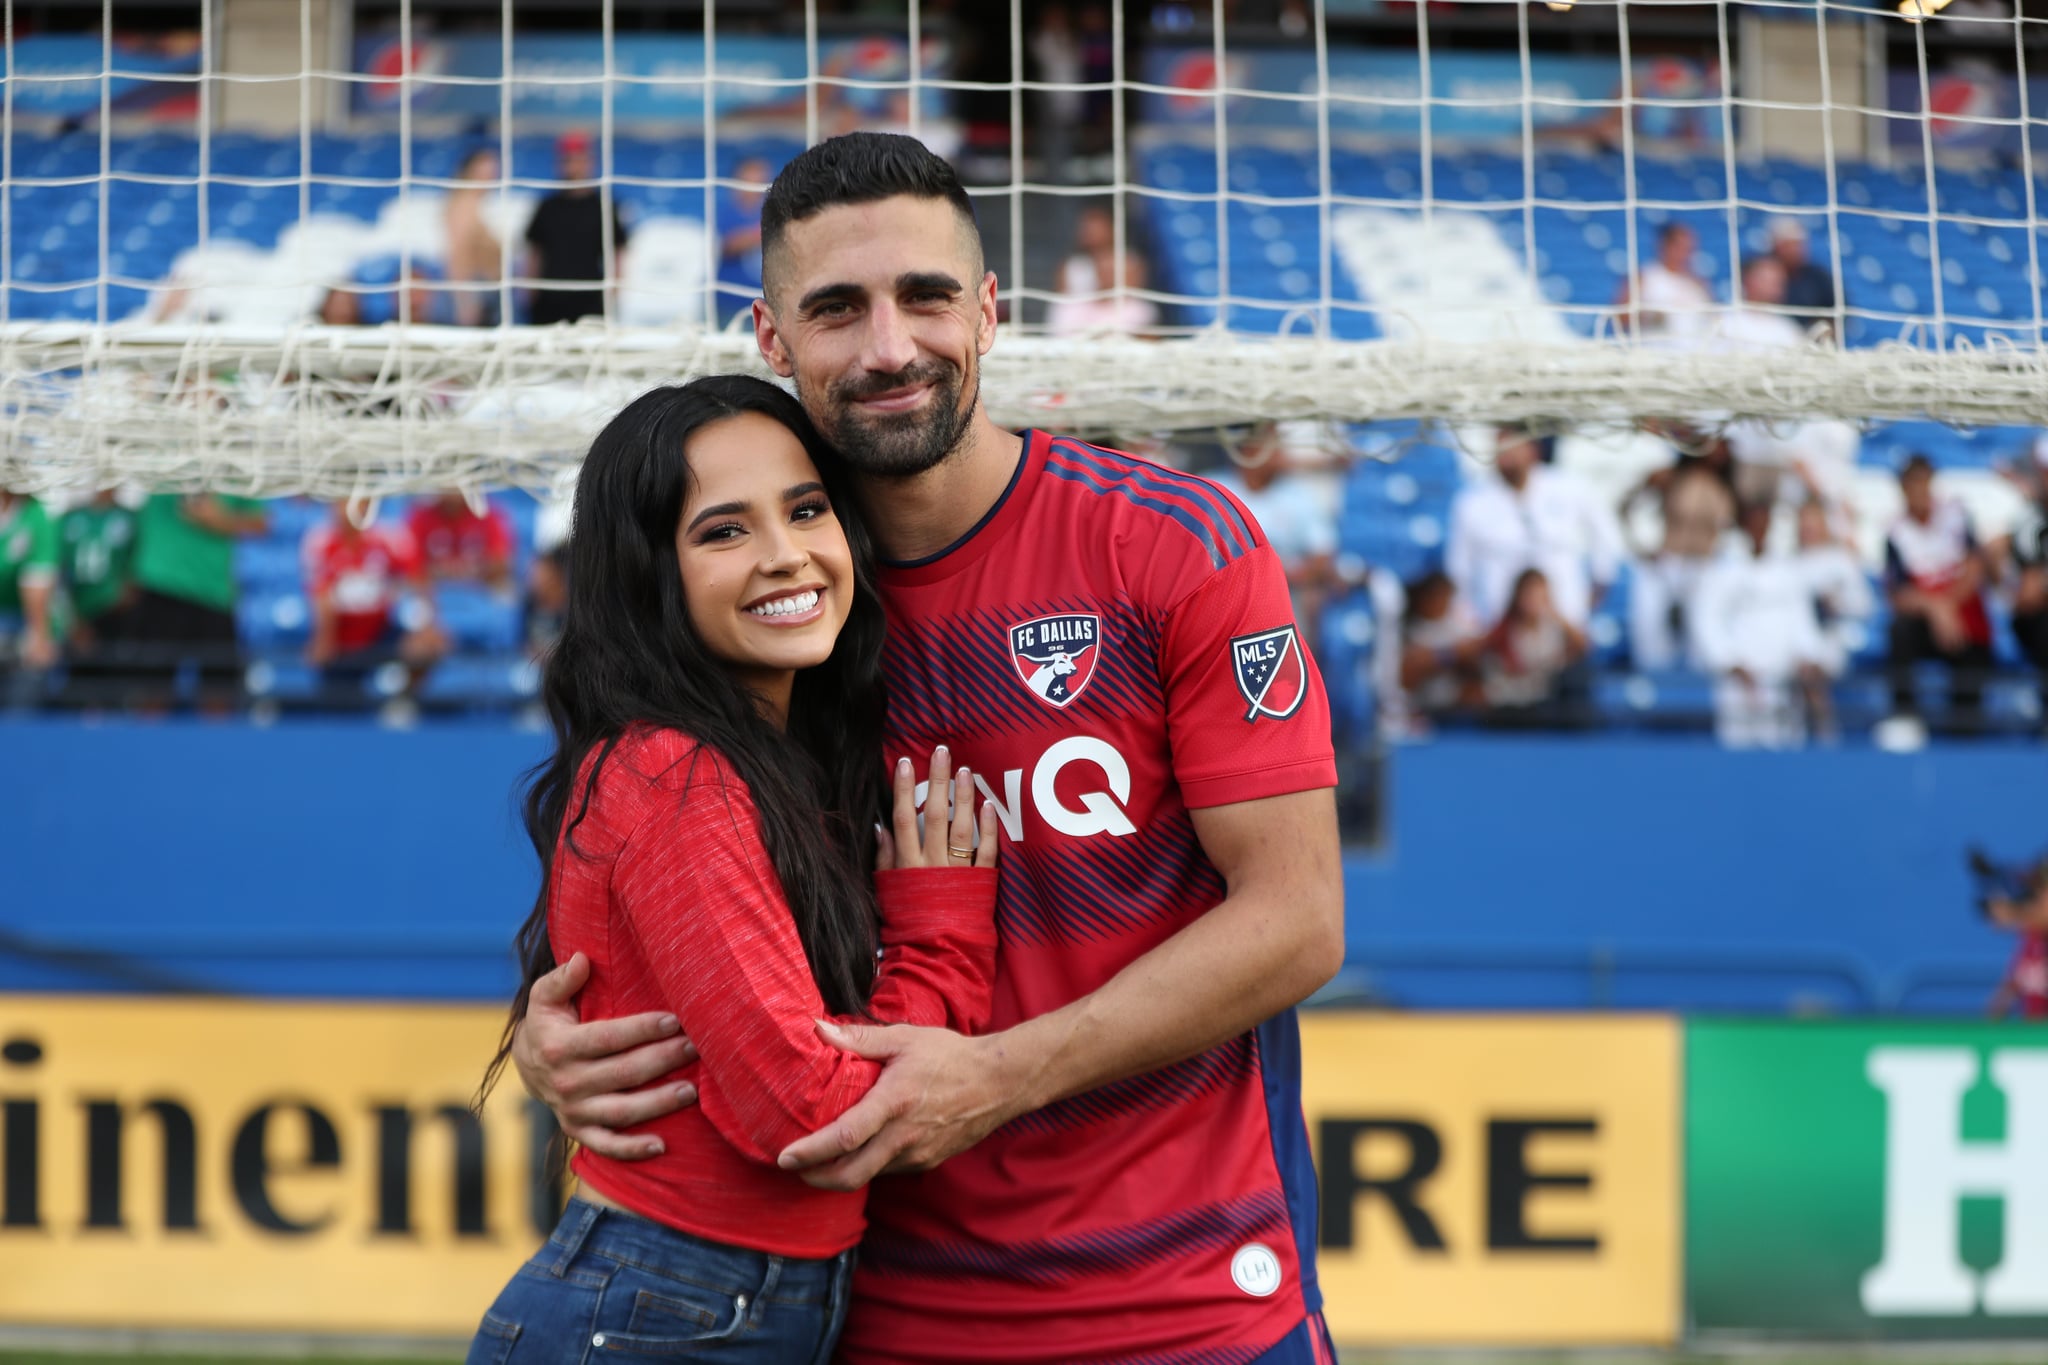 FRISCO, TX - OCTOBER 09: Singer Becky G and her boyfriend  Sebastian Lletget #12 of FC Dallas pose for picture after the game between FC Dallas and Sporting Kansas City at Toyota Stadium on October 9, 2022 in Frisco, Texas. (Photo by Omar Vega/Getty Images)